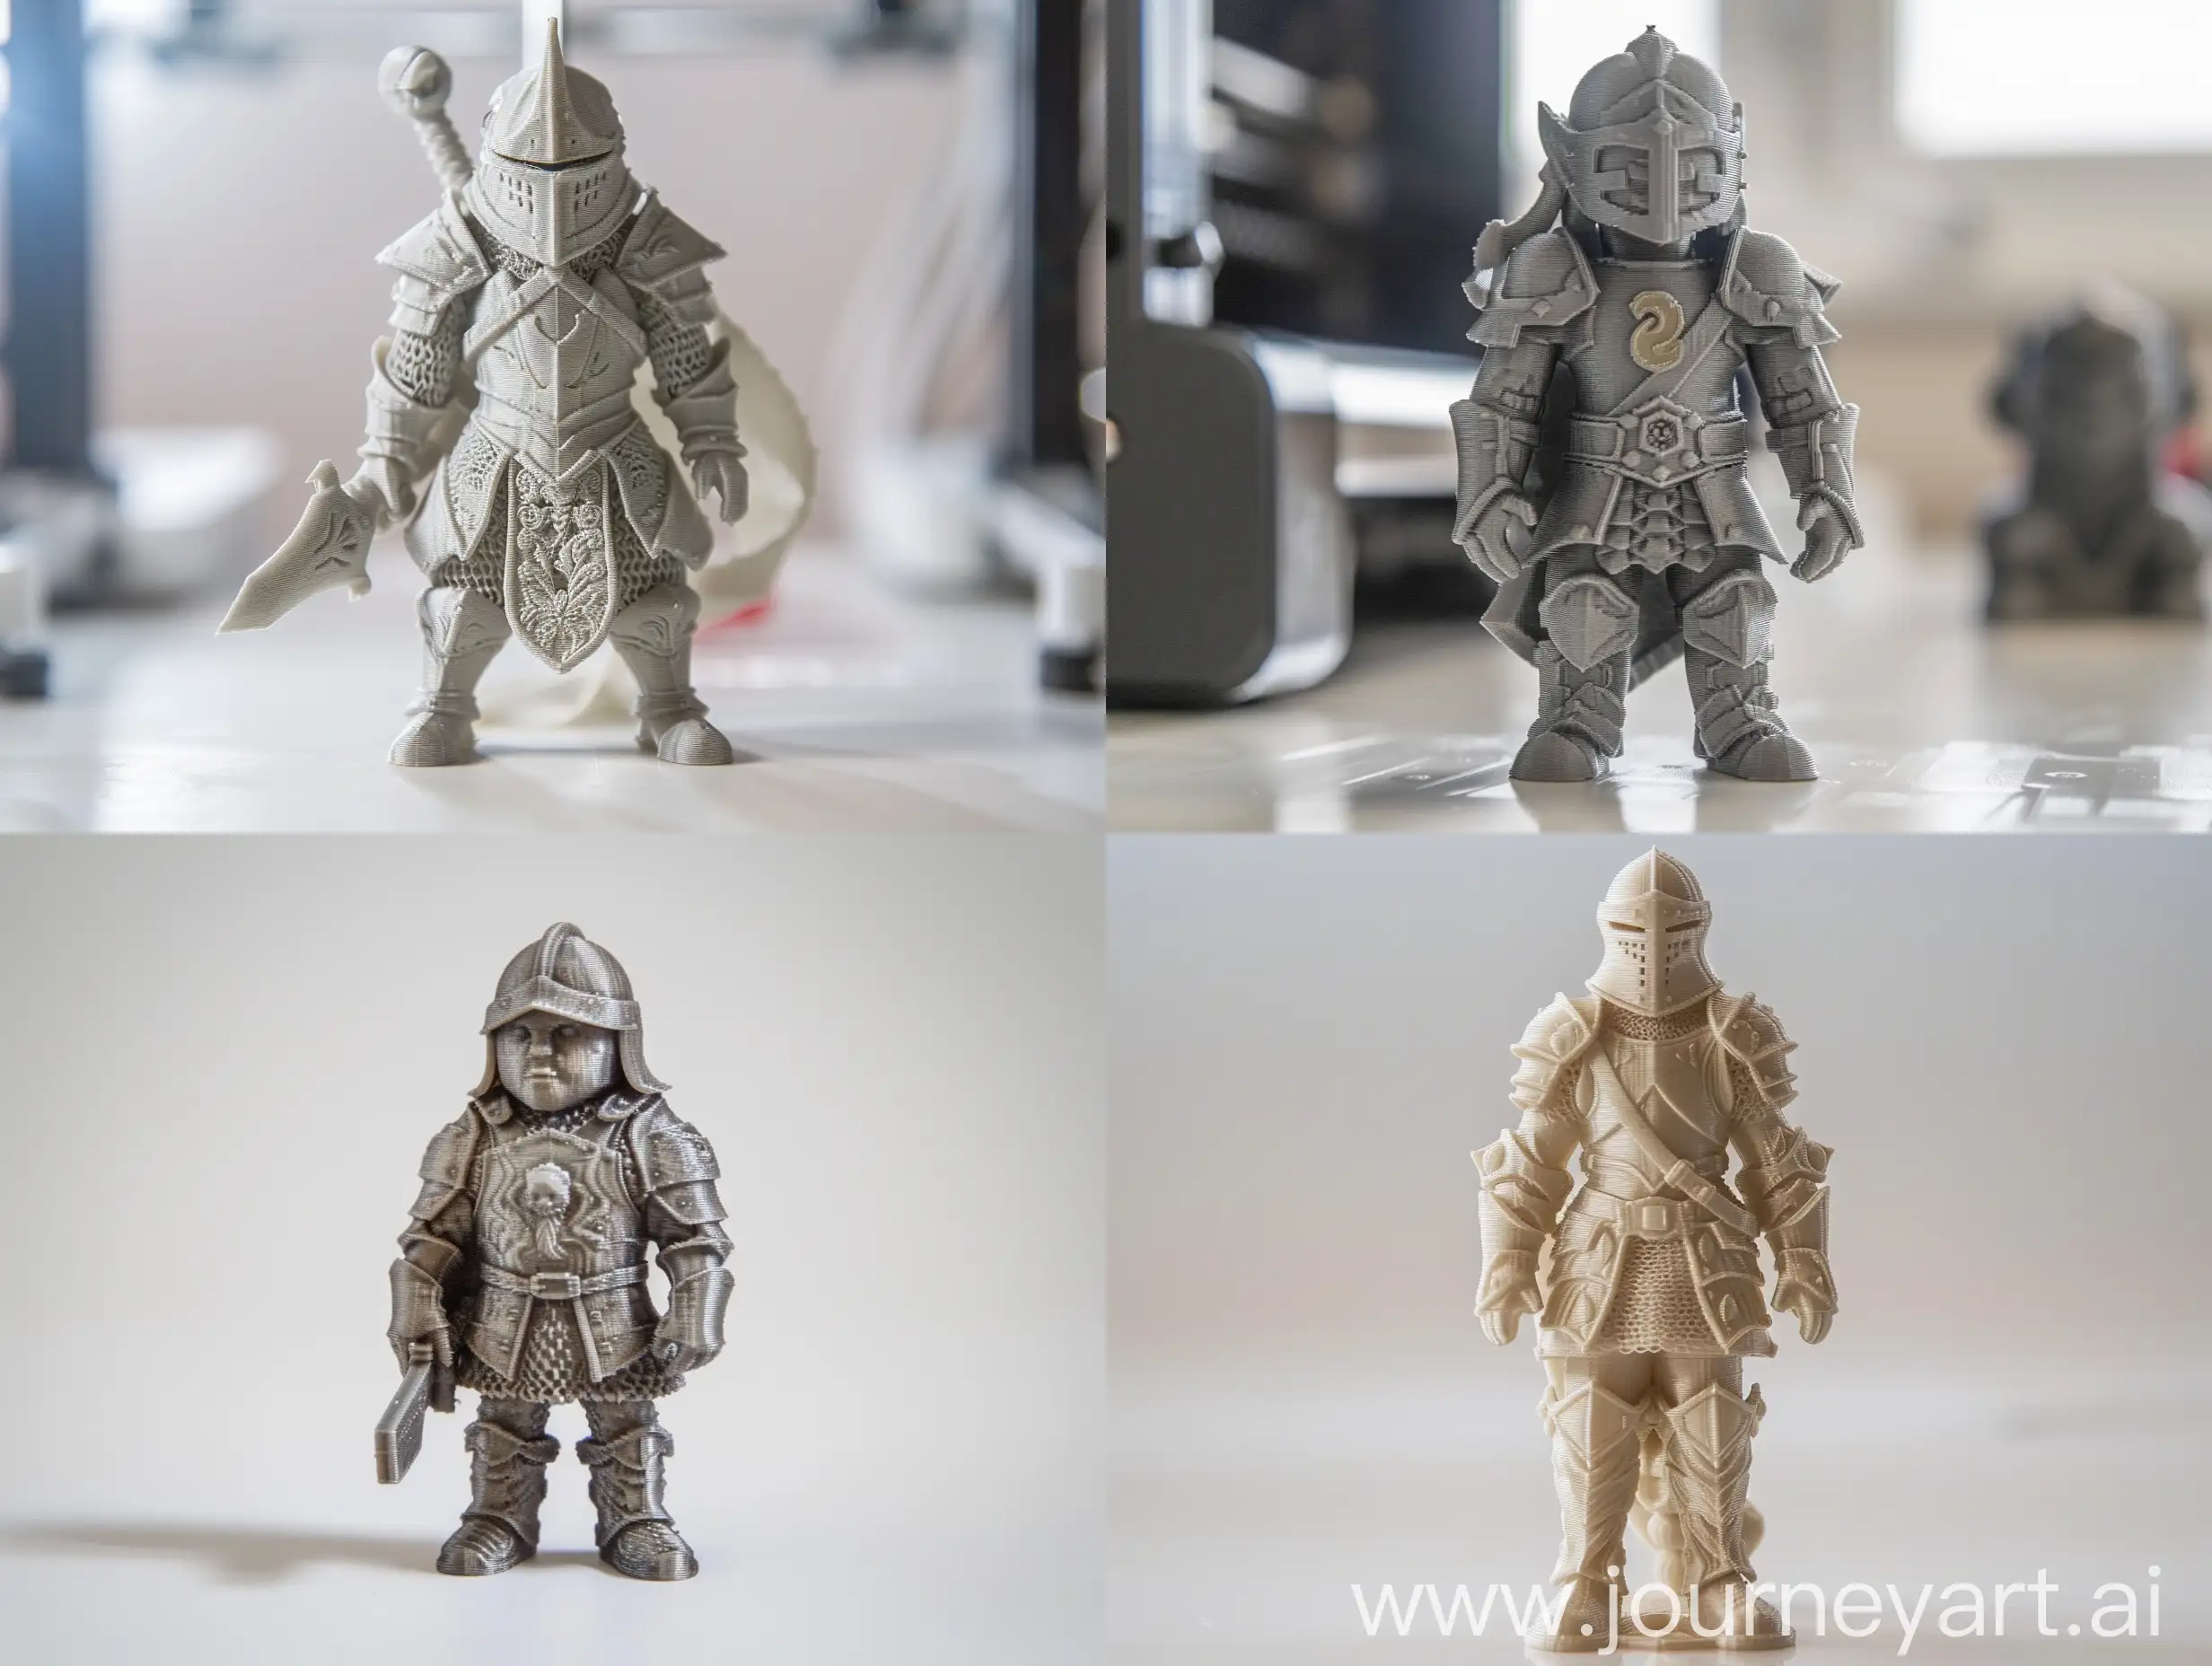 Miniature-Knight-3D-Printed-on-White-Background